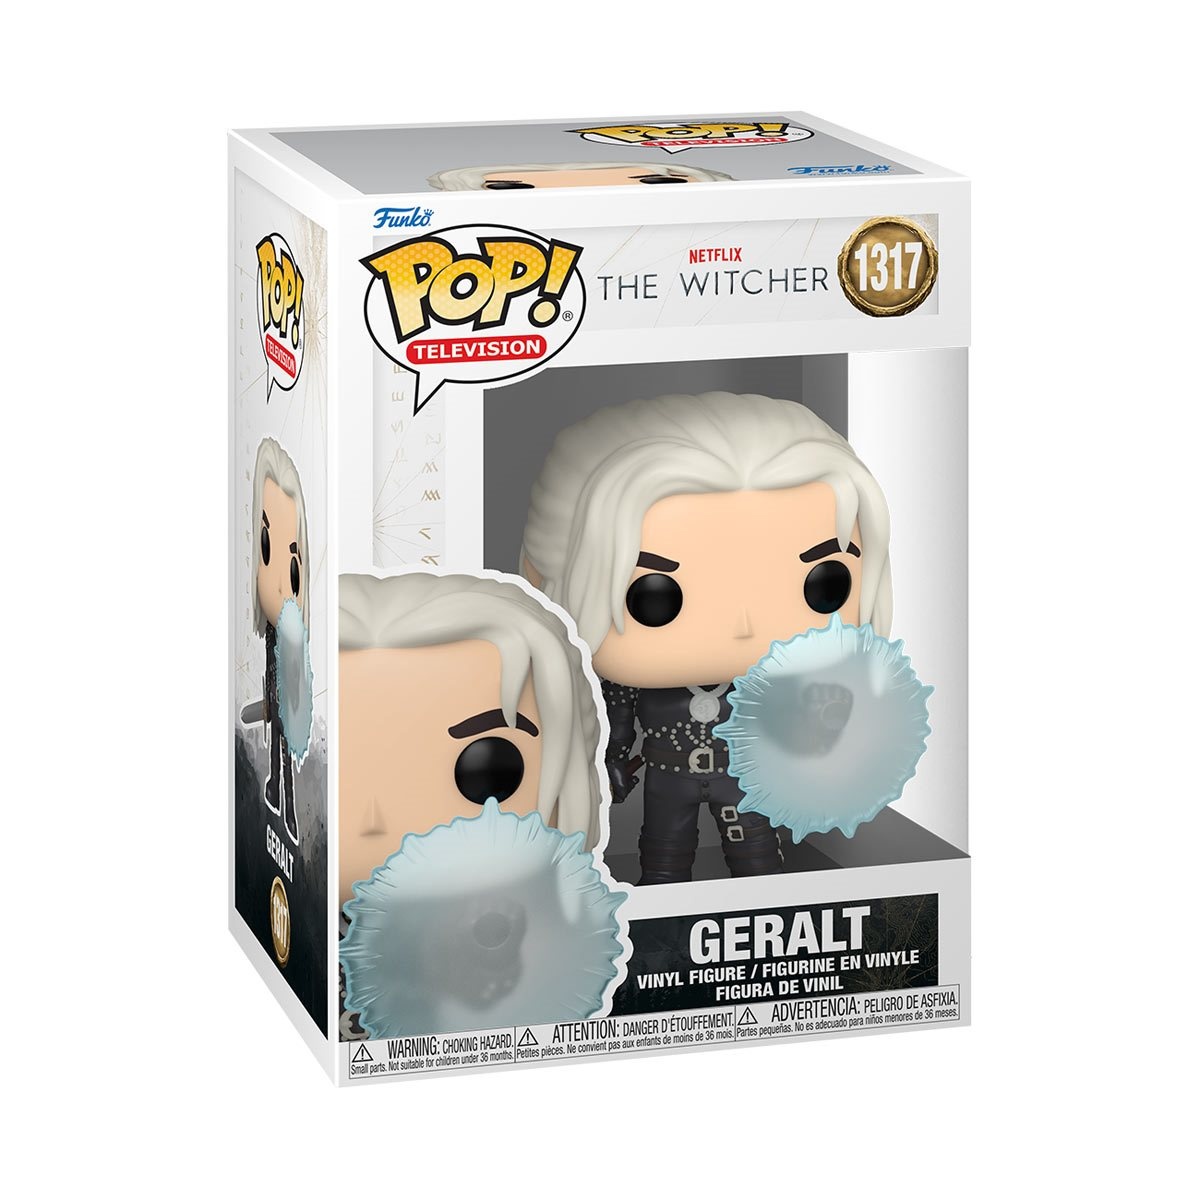 Funko Pop! The Witcher 1317 - Geralt with shield